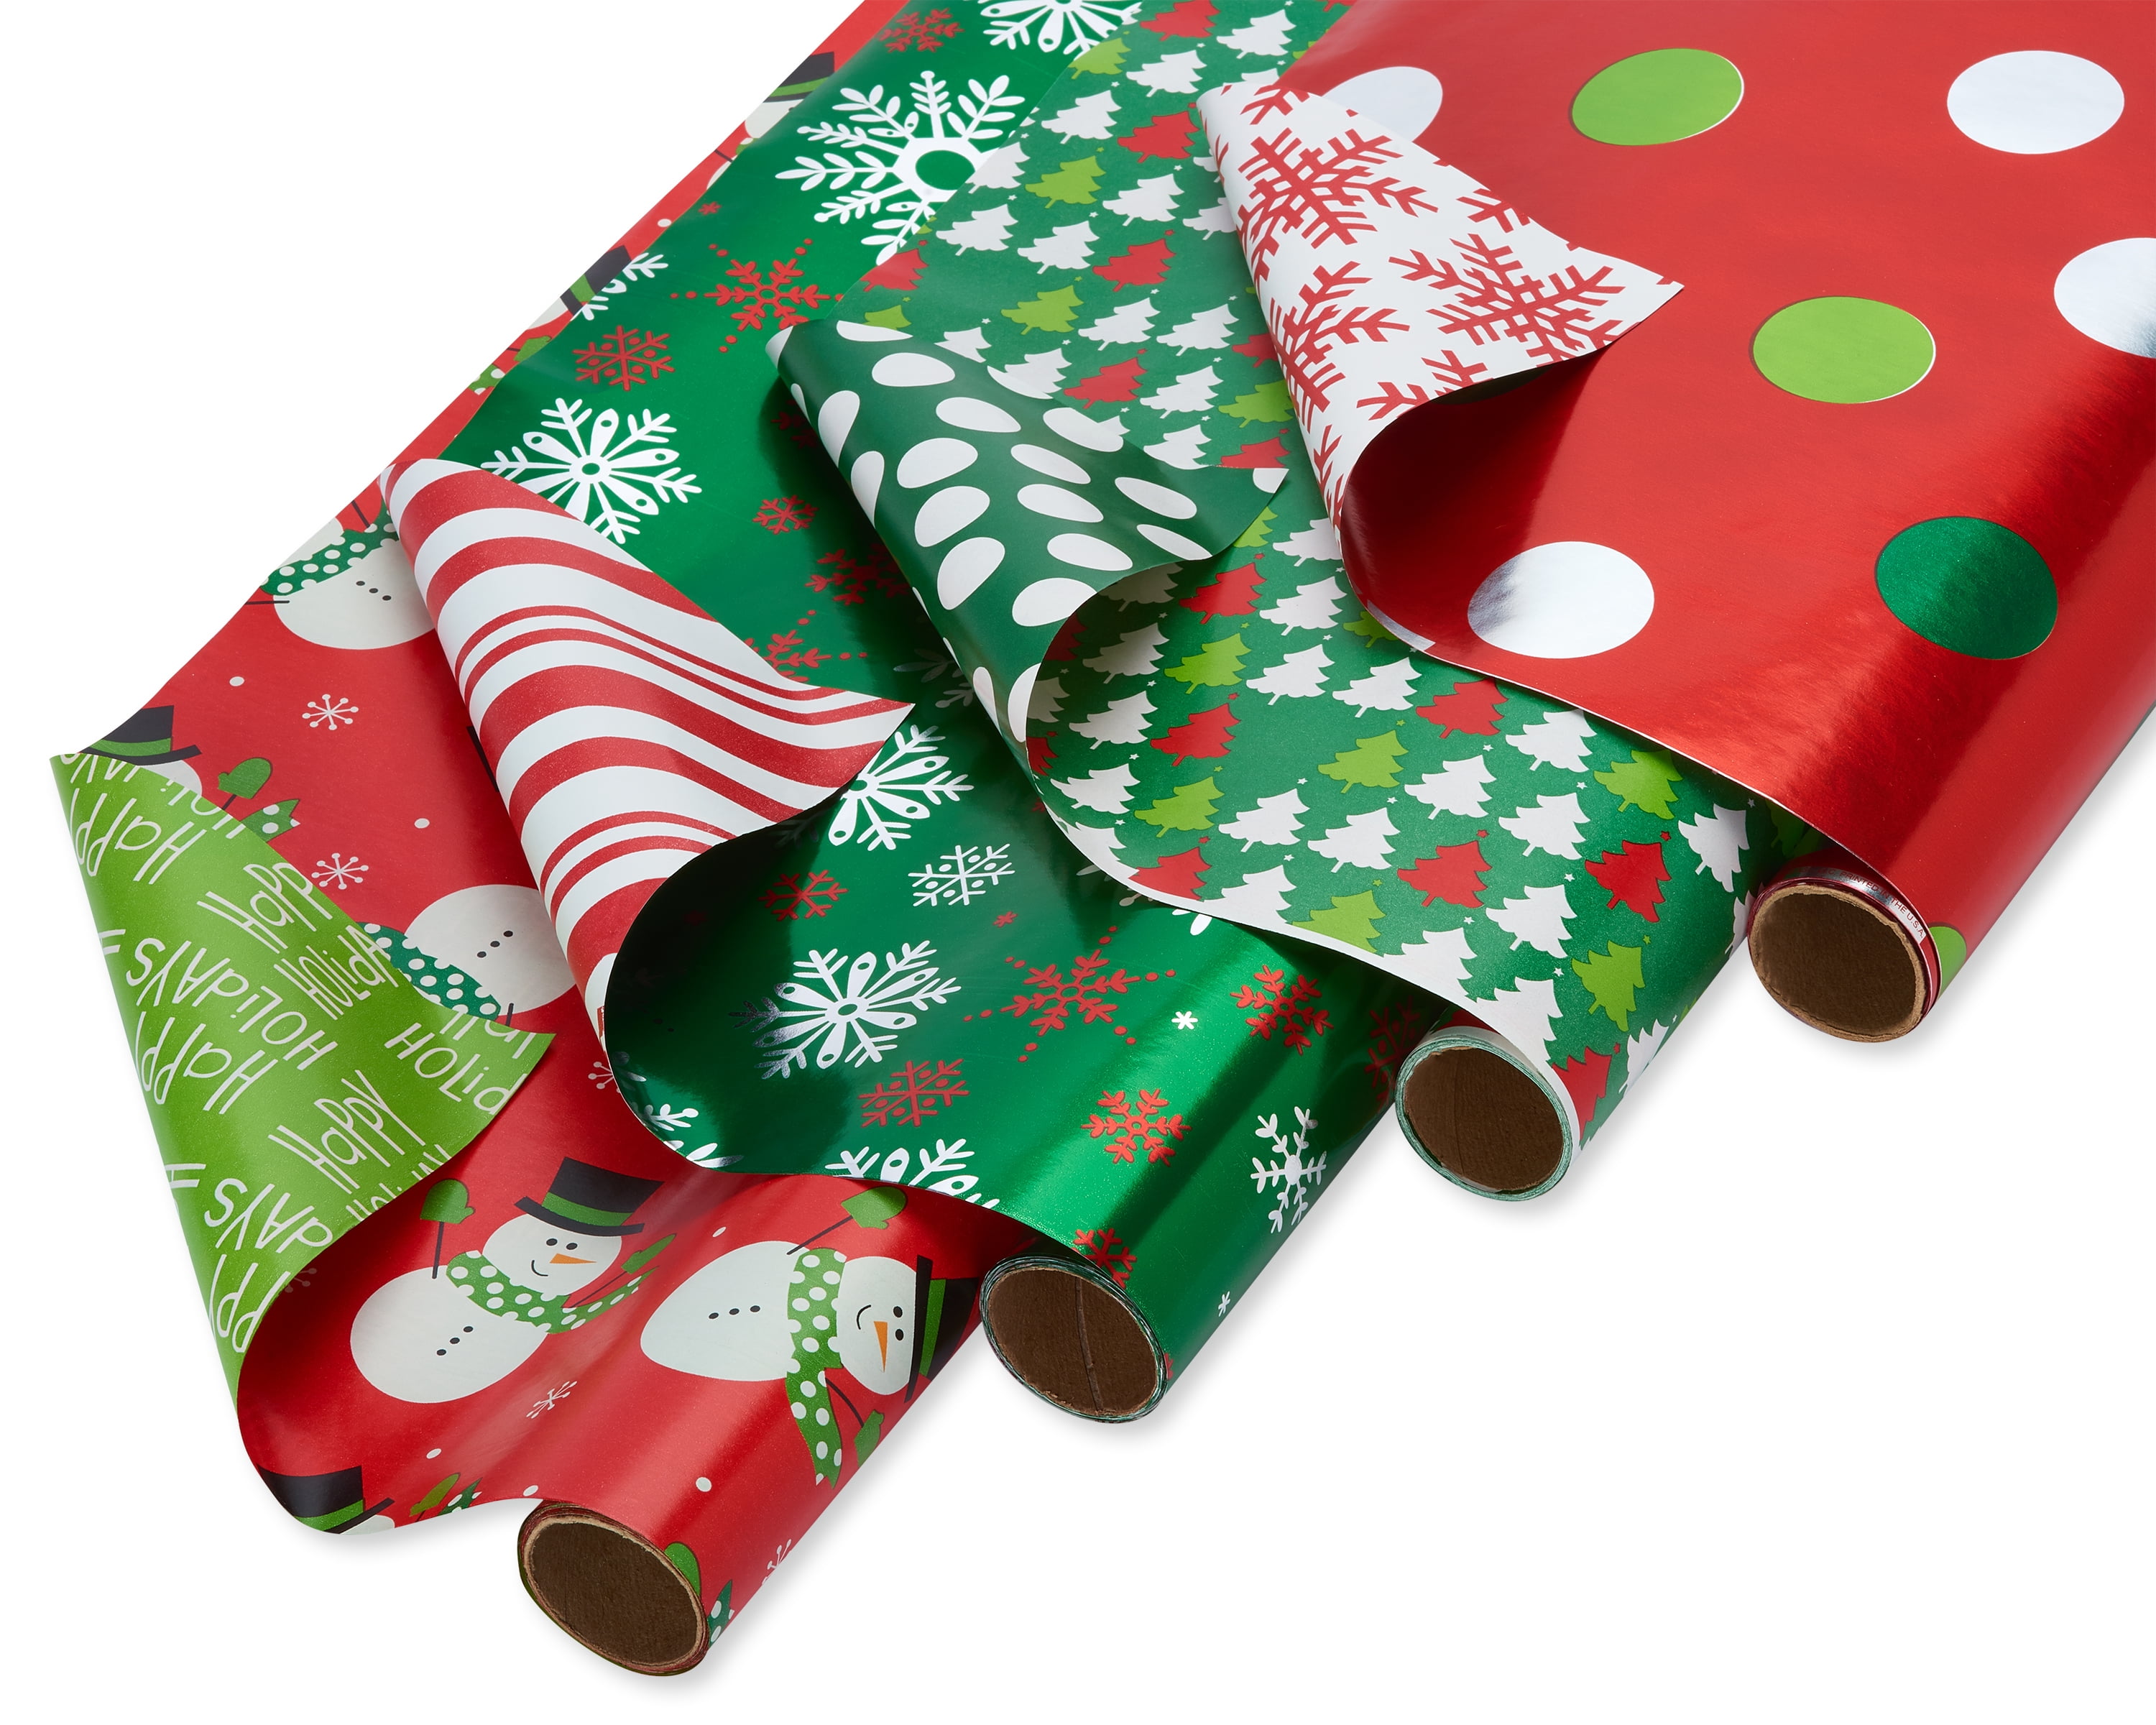 New Slidding Christman Theme Wrapping Paper Cutter. 2 PACK! 